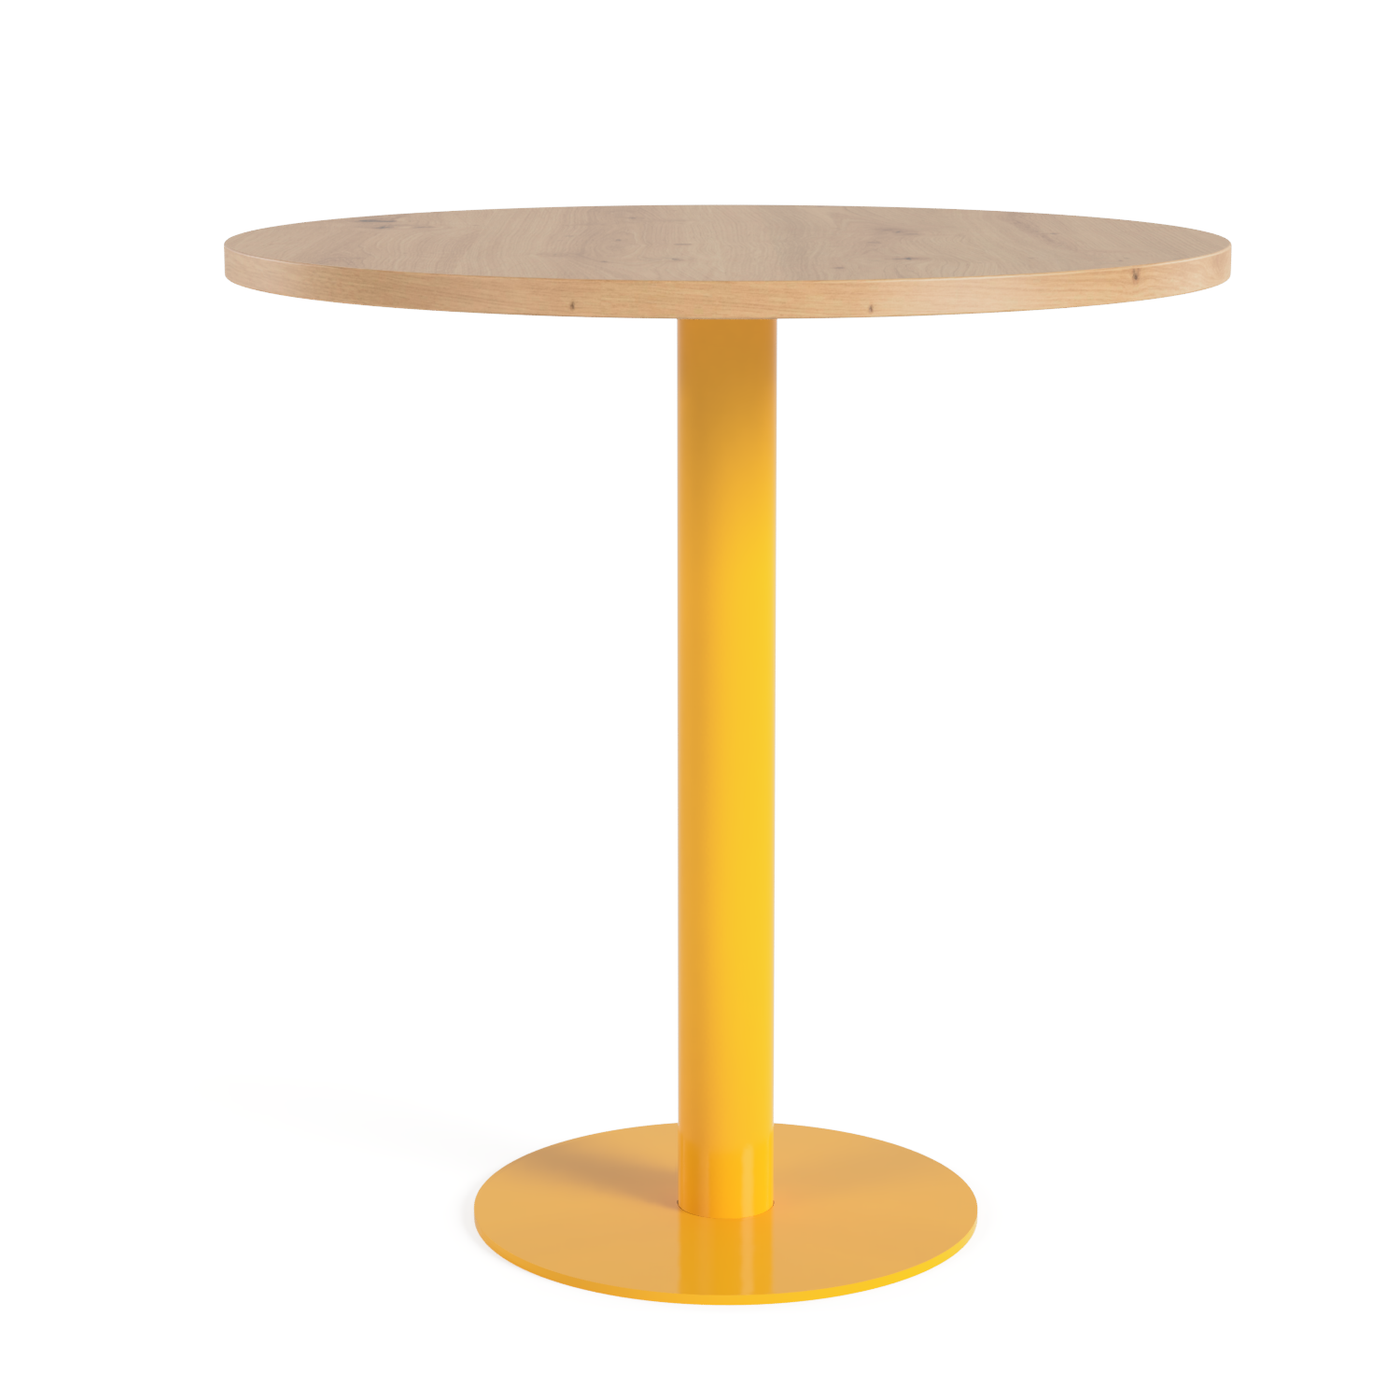 Round Table Nº 0 - Bistro / Cafe Table - Zinc Yellow / Solid Oak